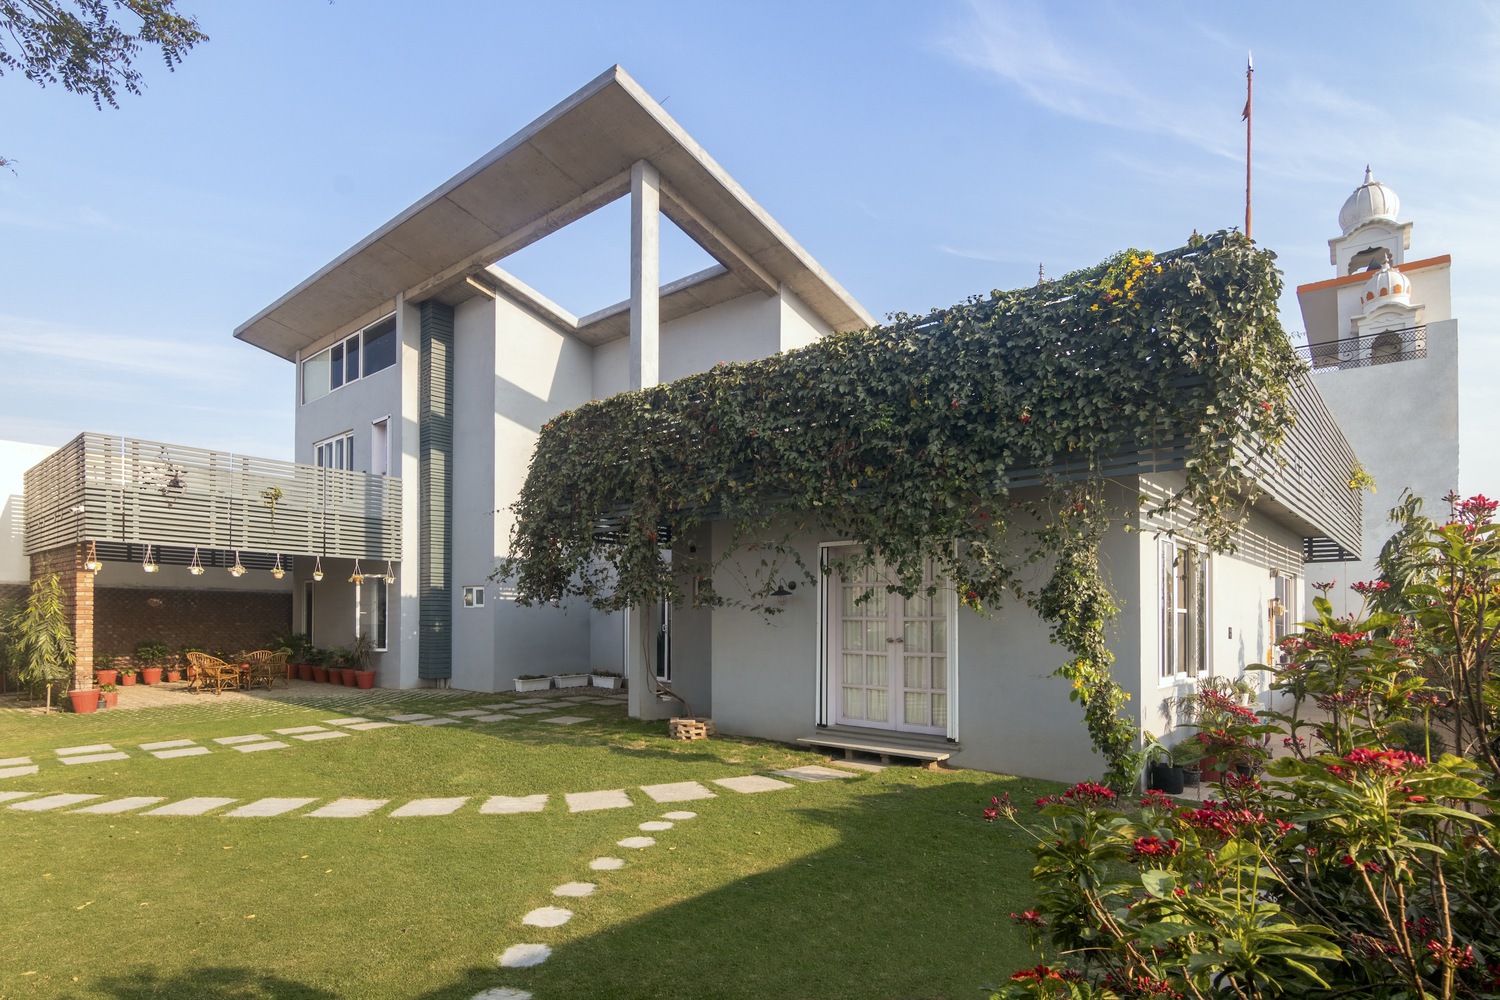 The exterior of the Nilaya Residence. Photo by Harsh Nigam.